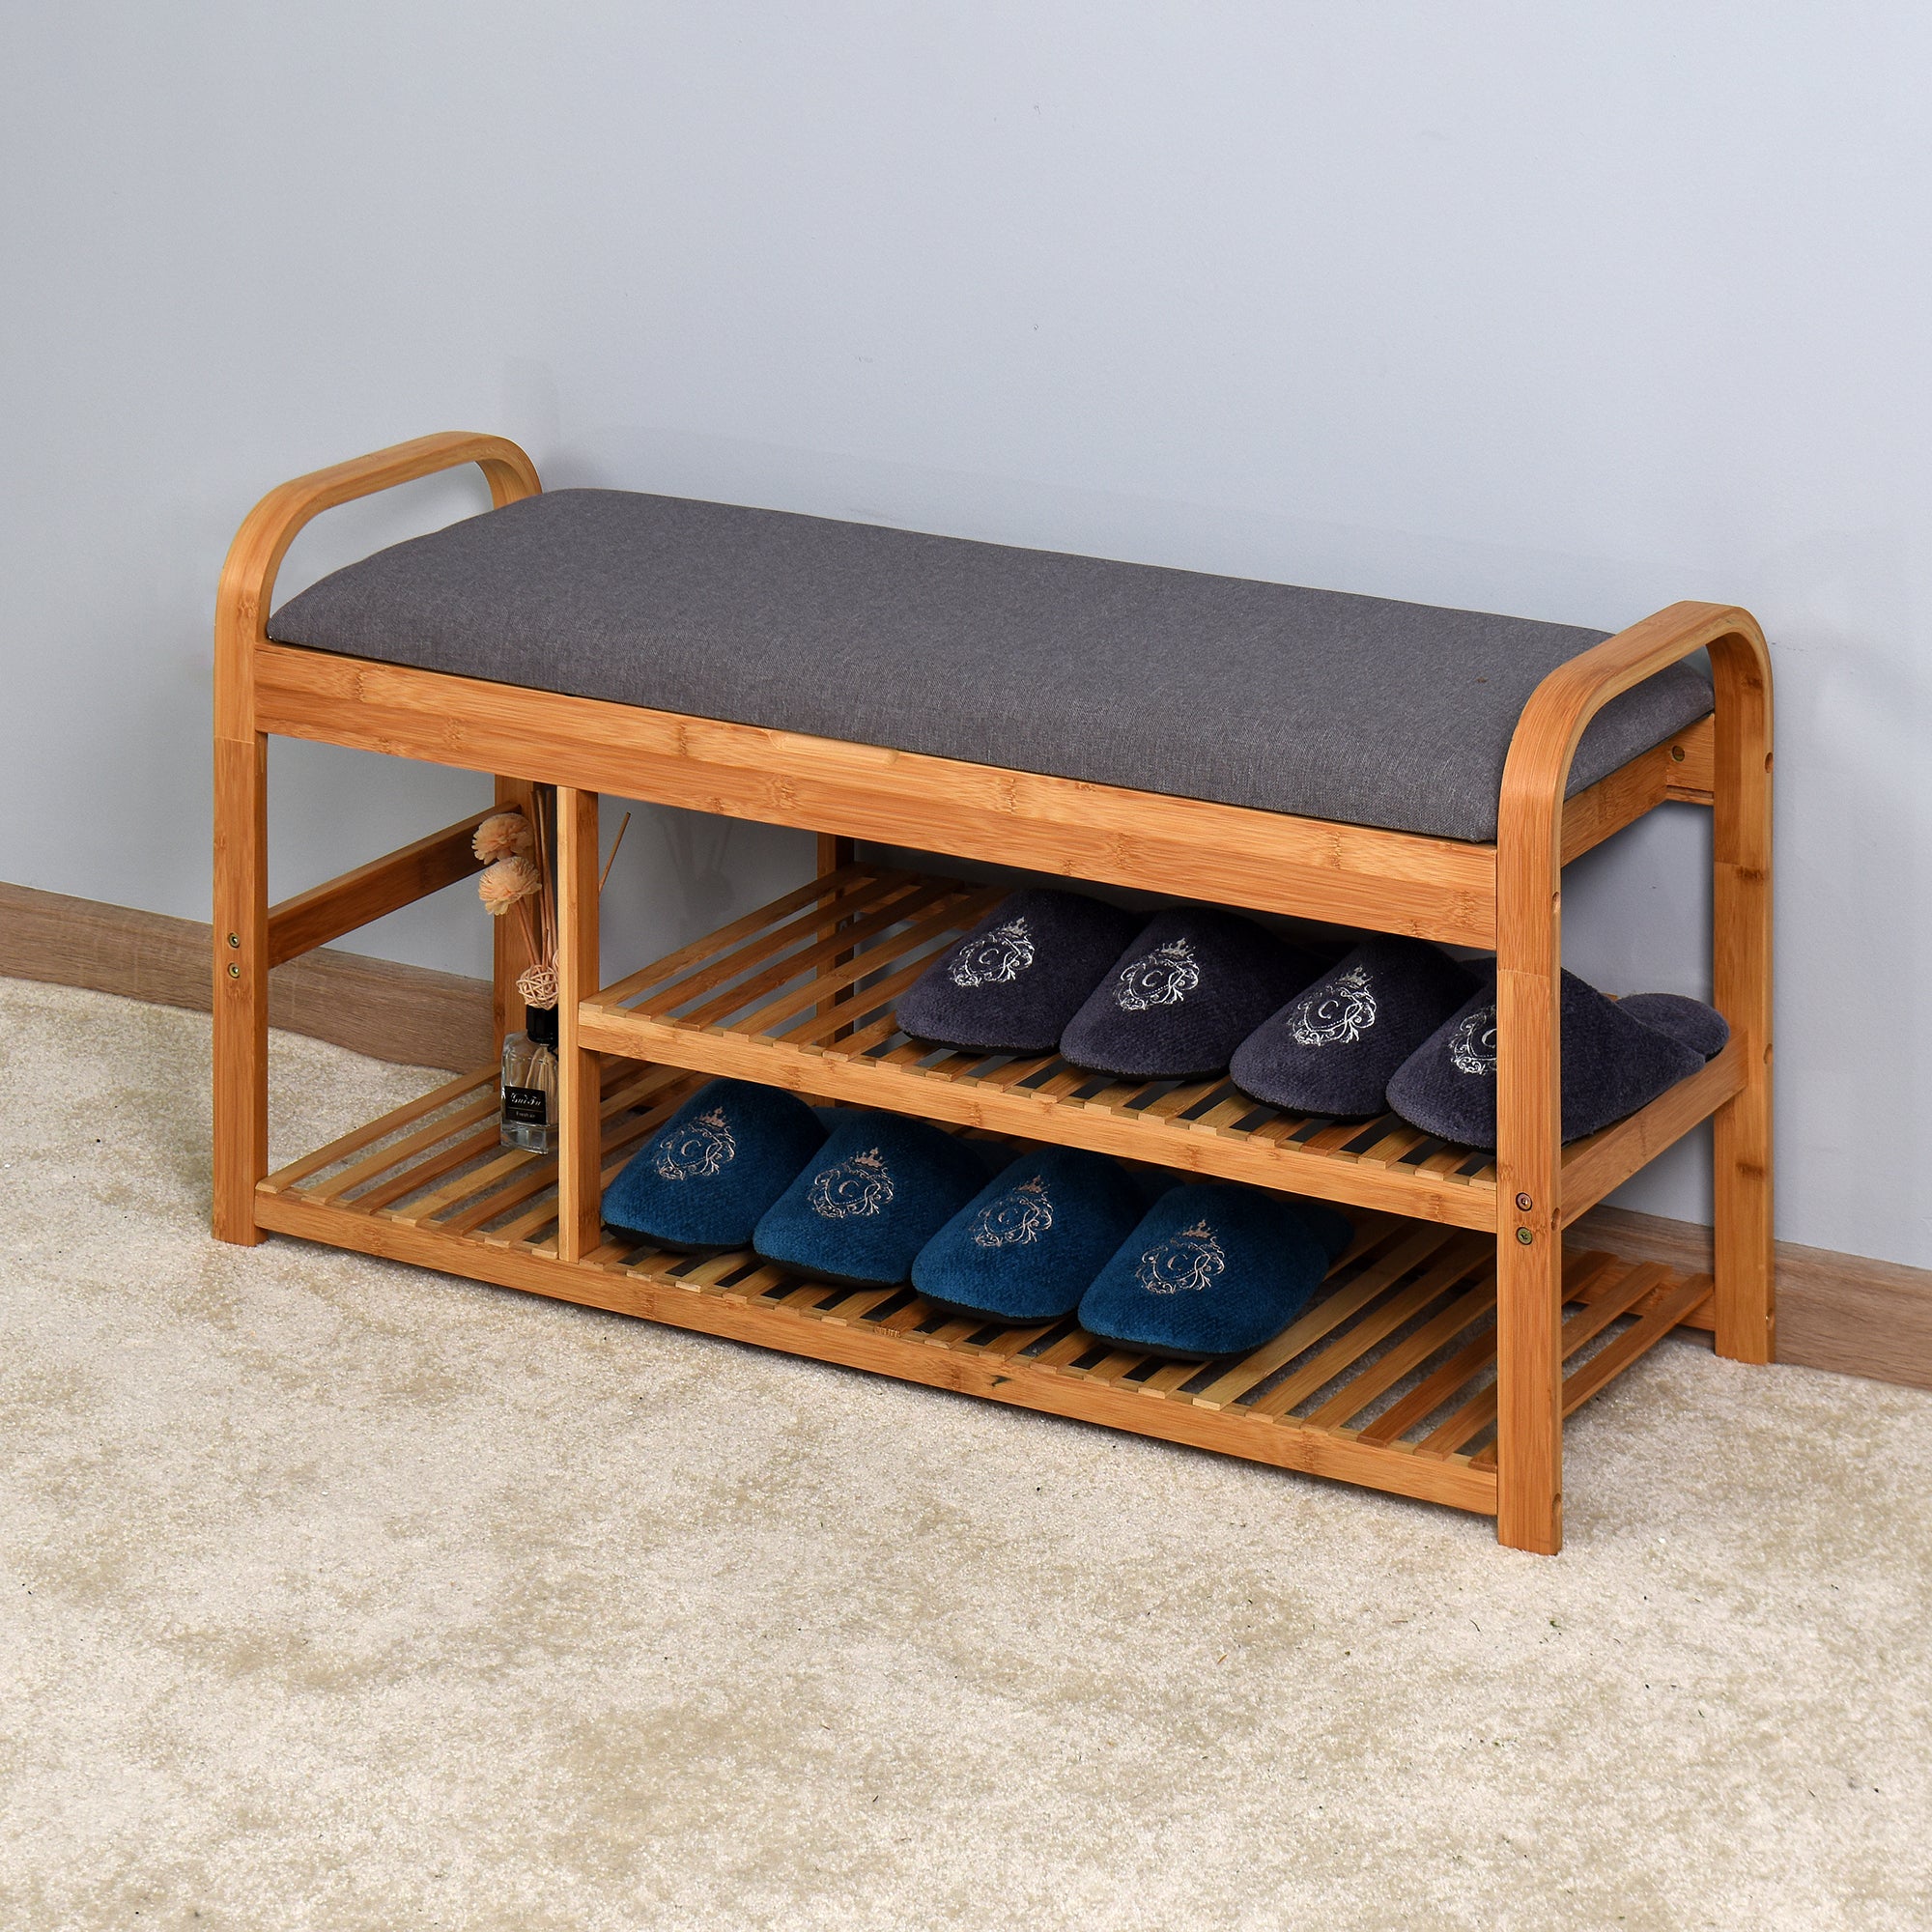 Living Room Bamboo Storage Bench， Entryway 3 Shelves Bench with flip storage compartment